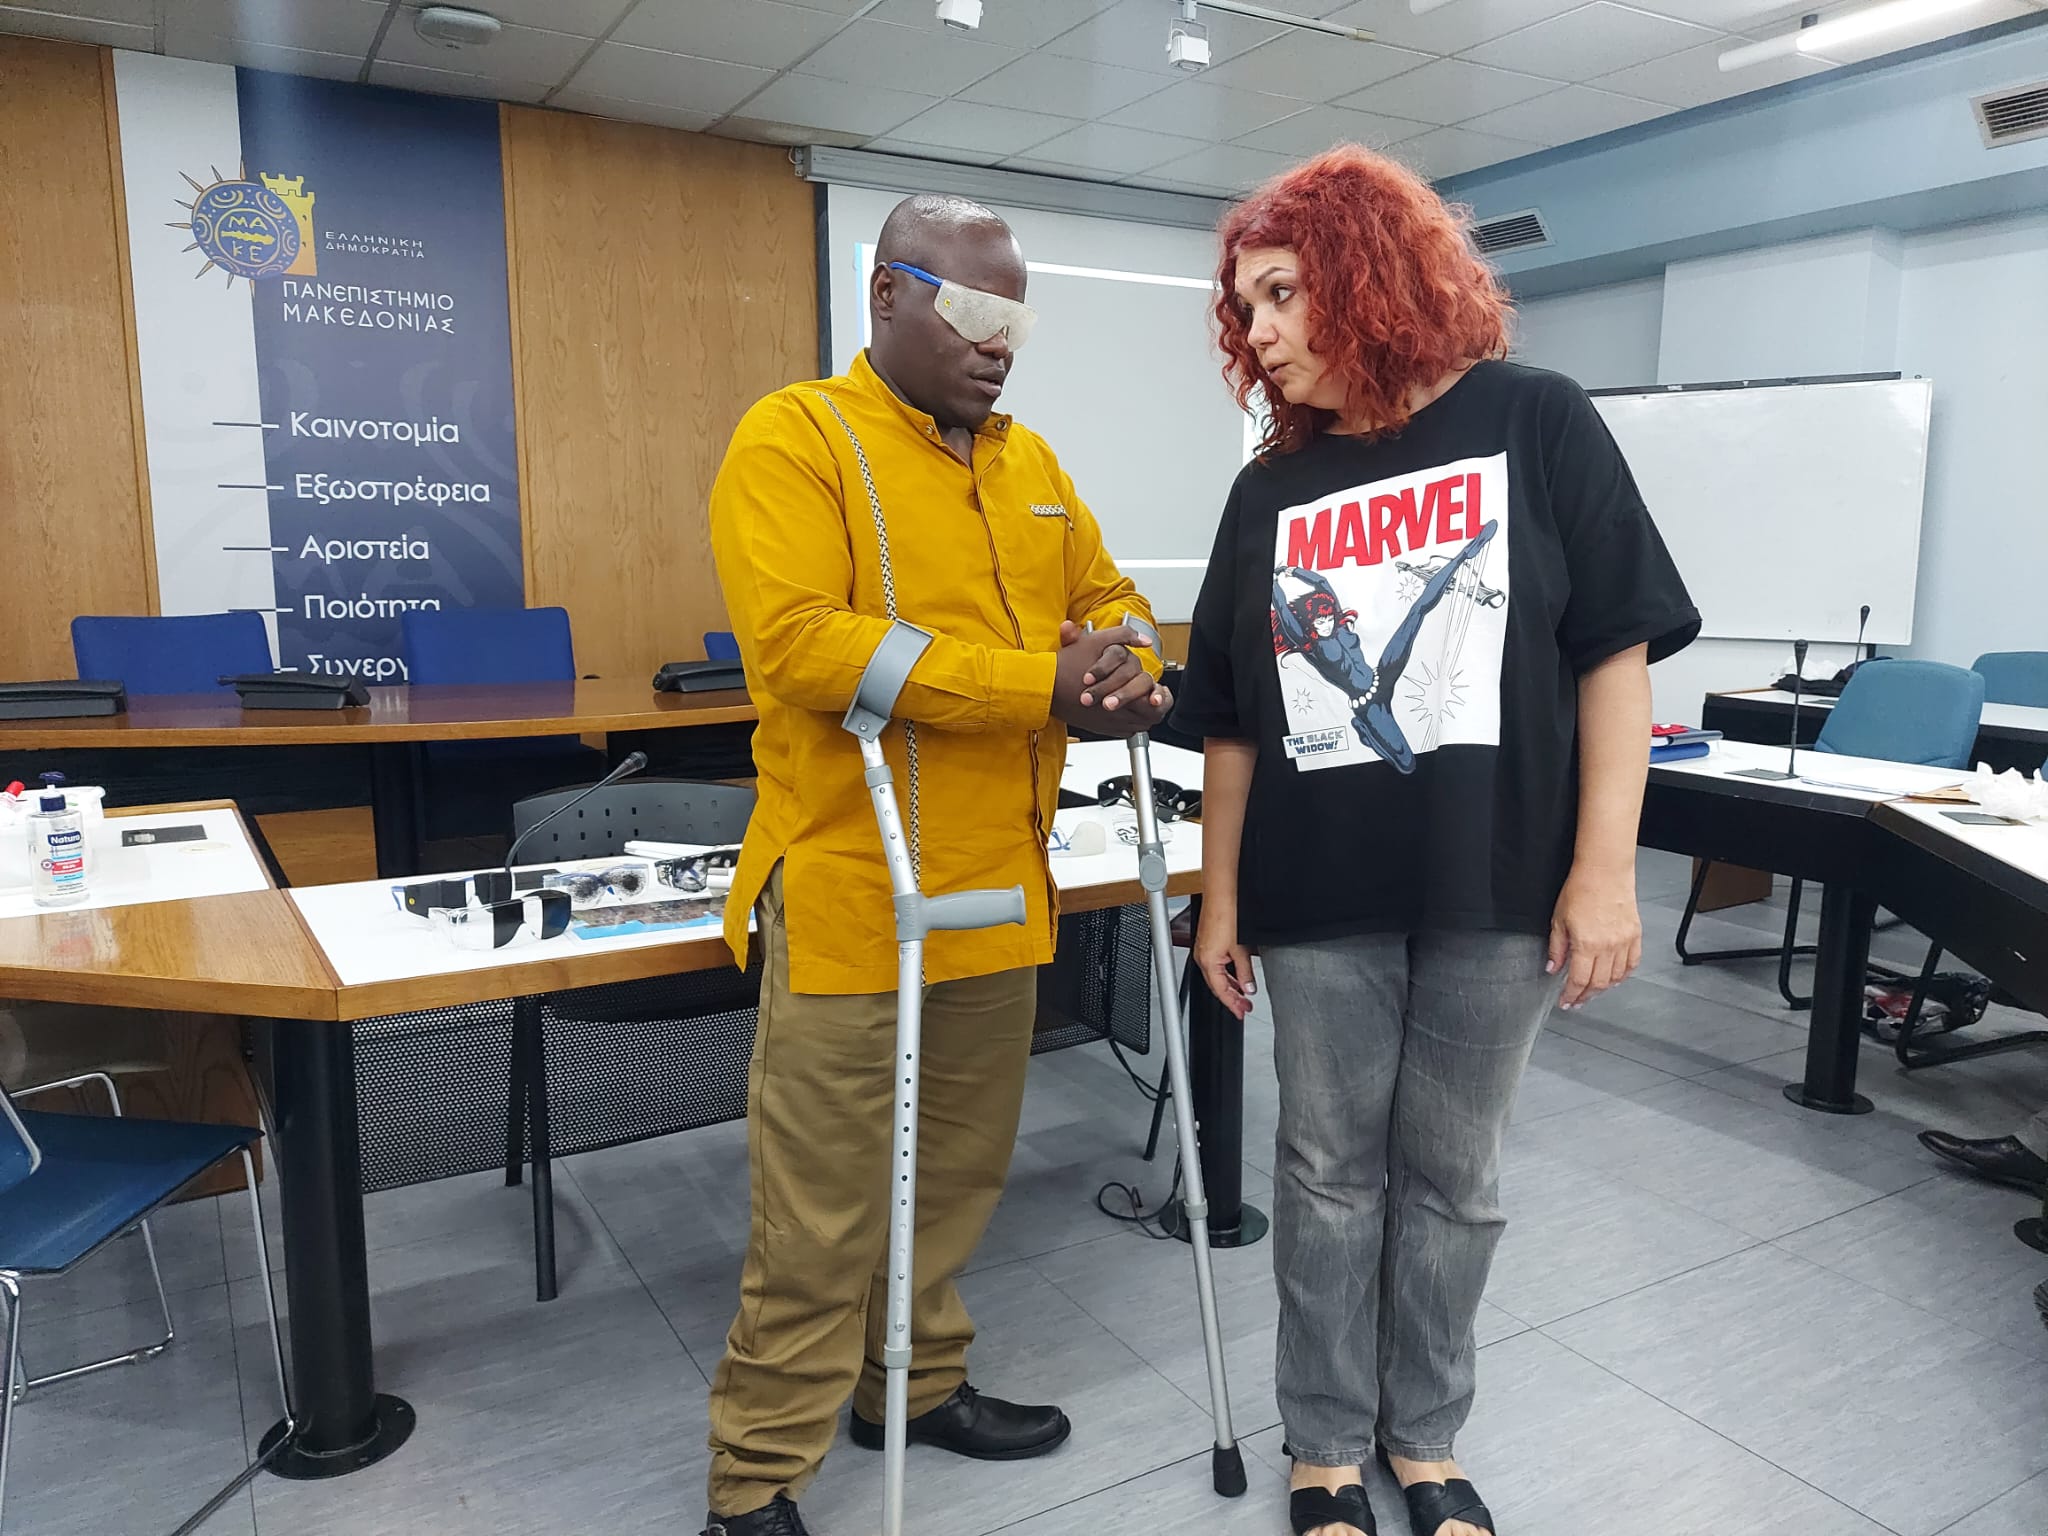 NCPD Oswald Tuyizere learning about the accessibility resources provided by the University of Macedonia during Study Visit in Thessaloniki, Greece